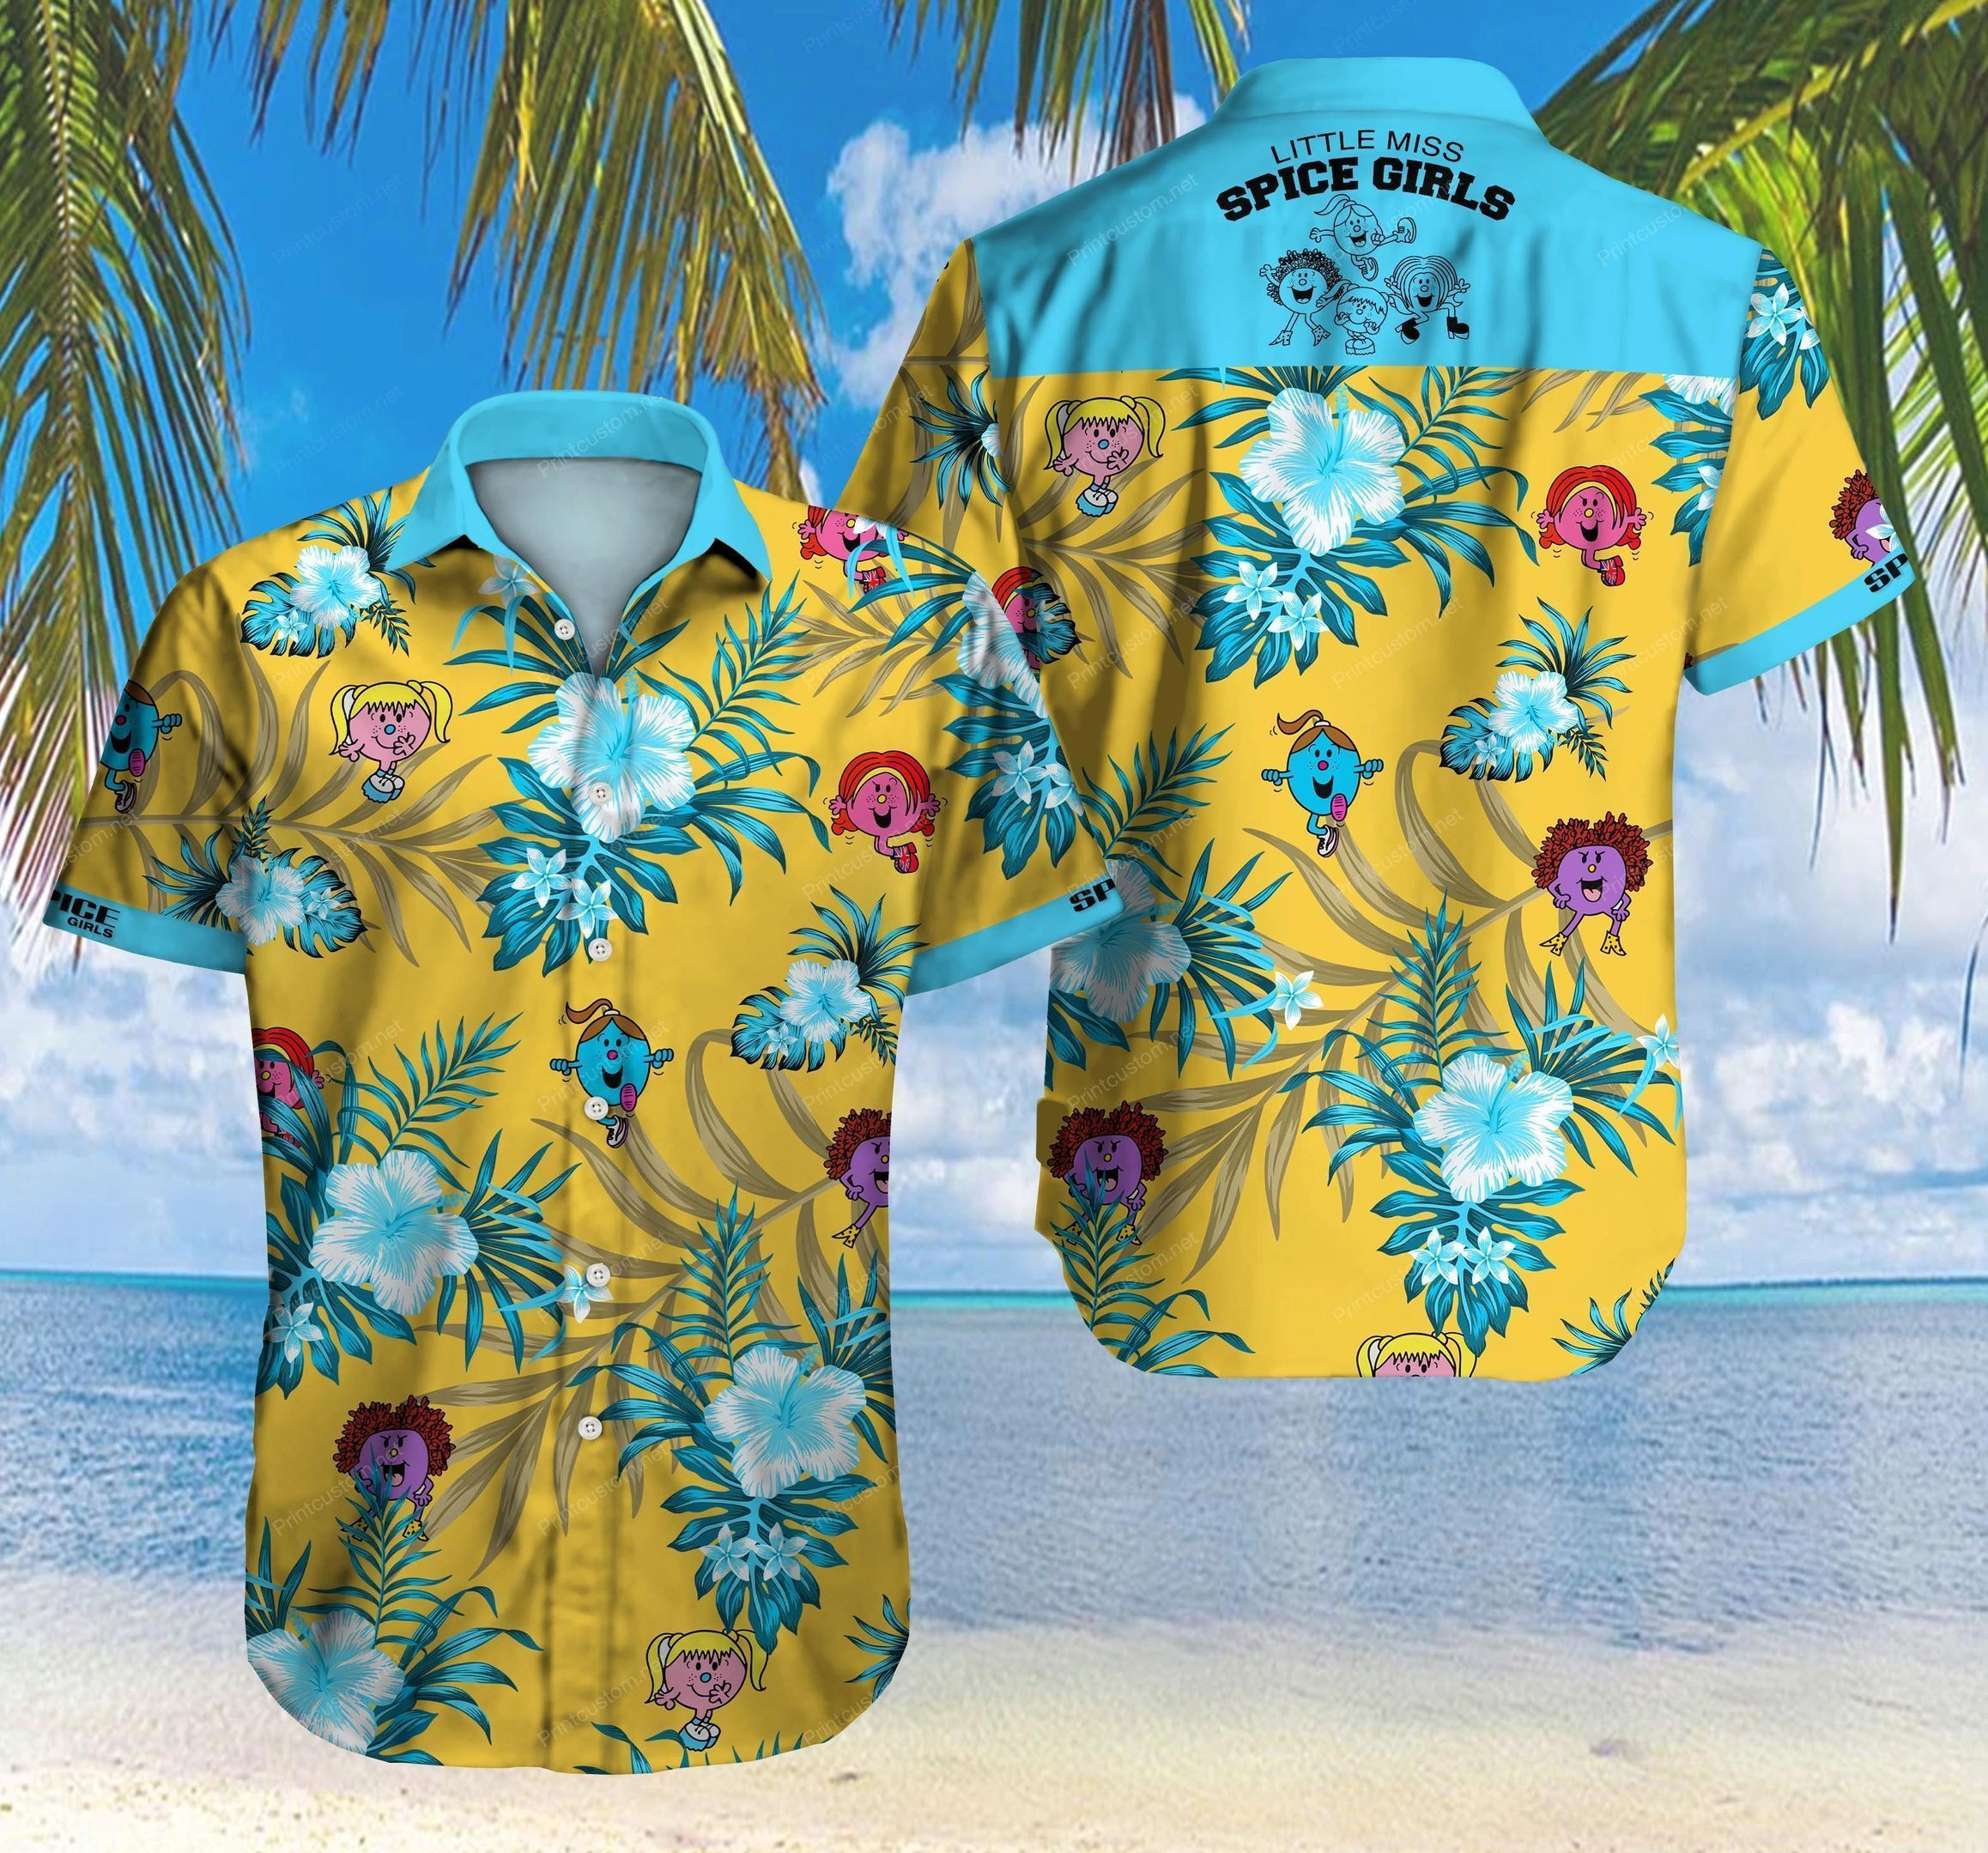 Choose from the many styles and colors to find your favorite Hawaiian Shirt below 163